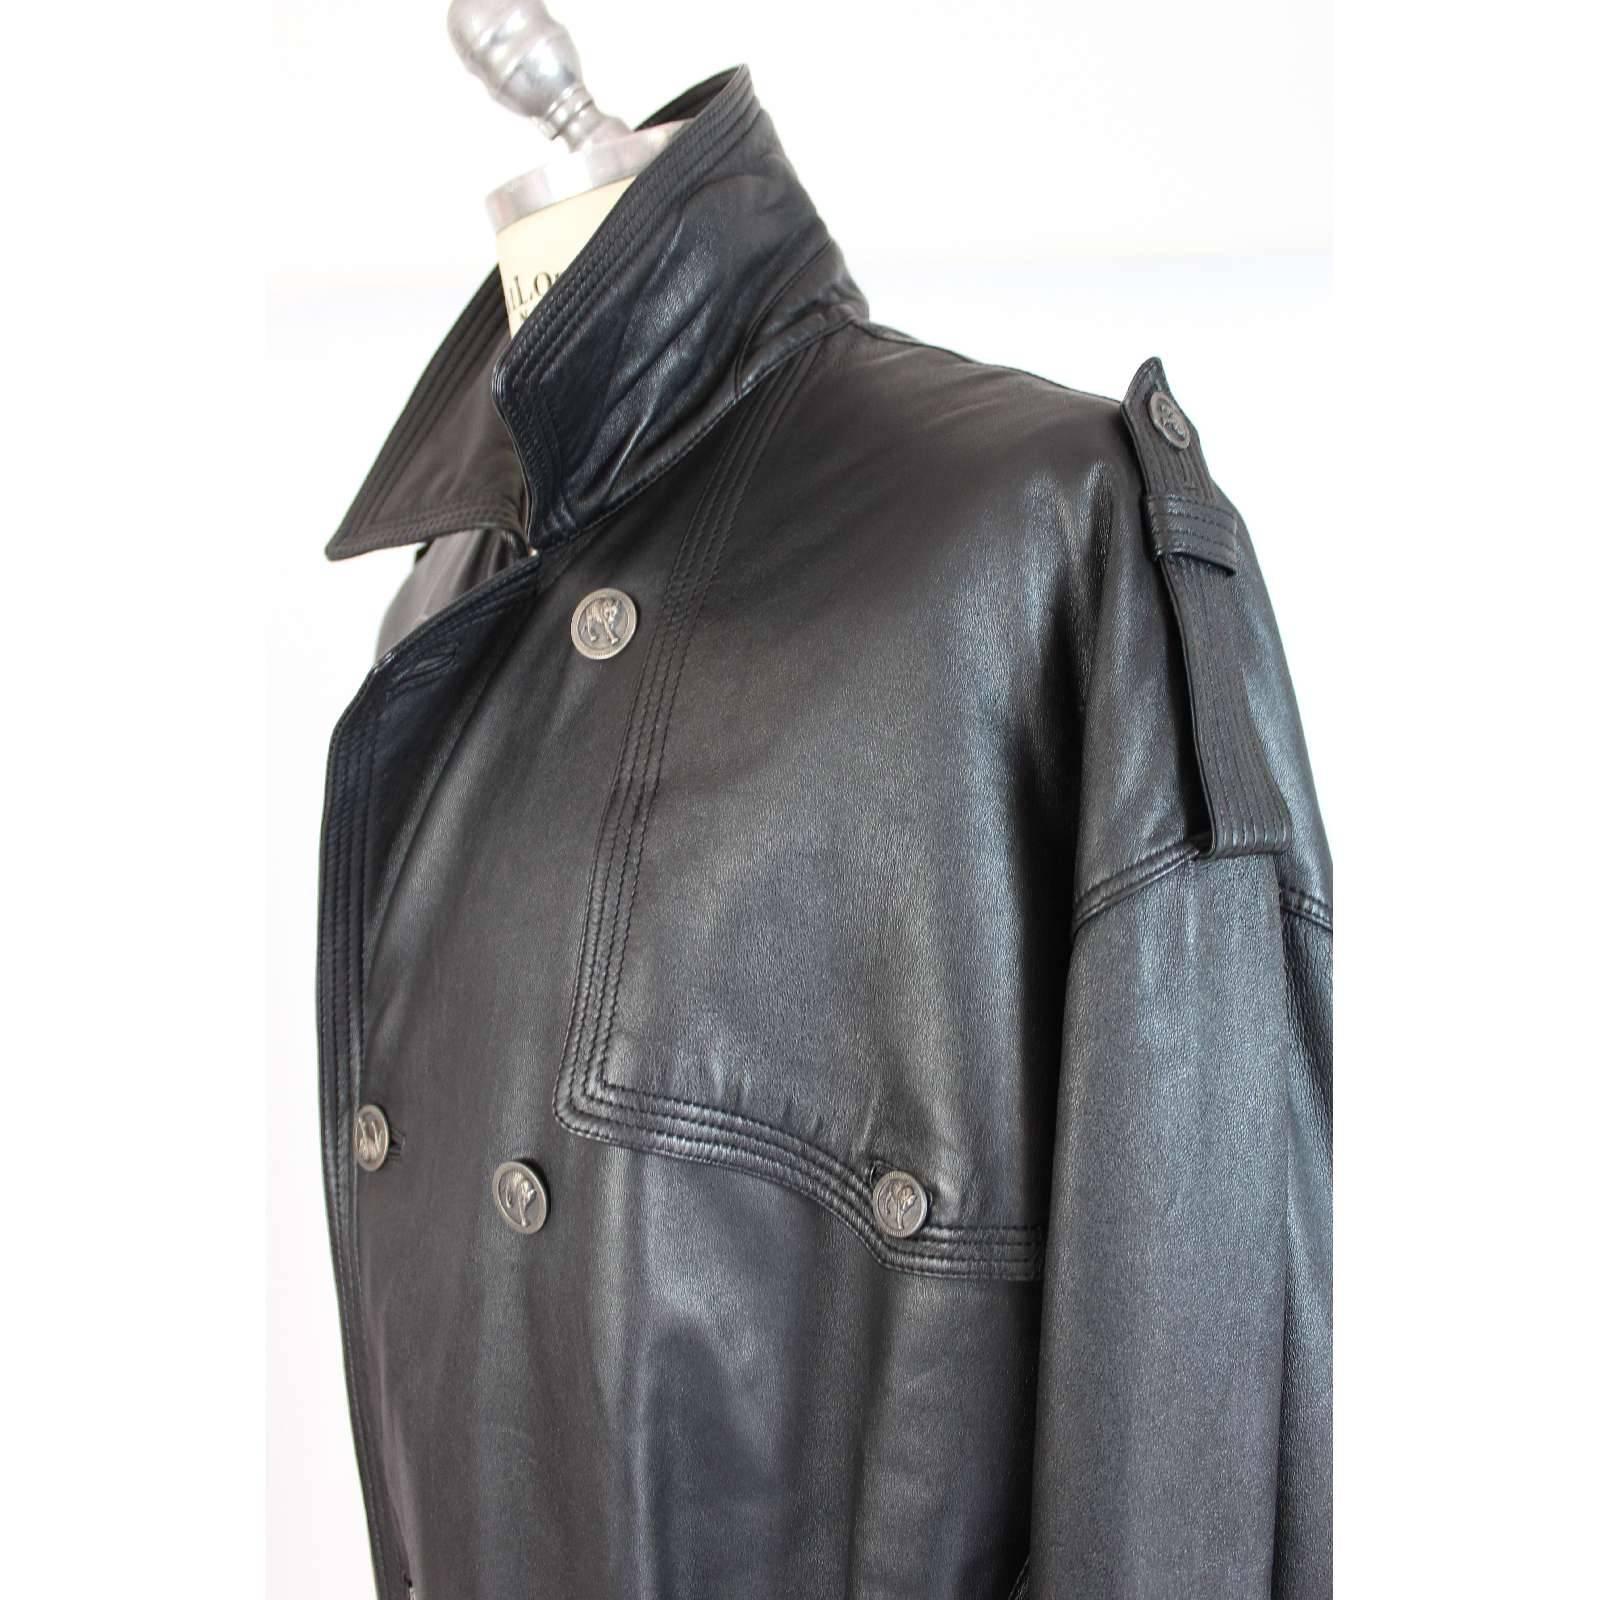 Versus Gianni Versace black leather motorcycle raincoat trench coat size 38/52 For Sale 1